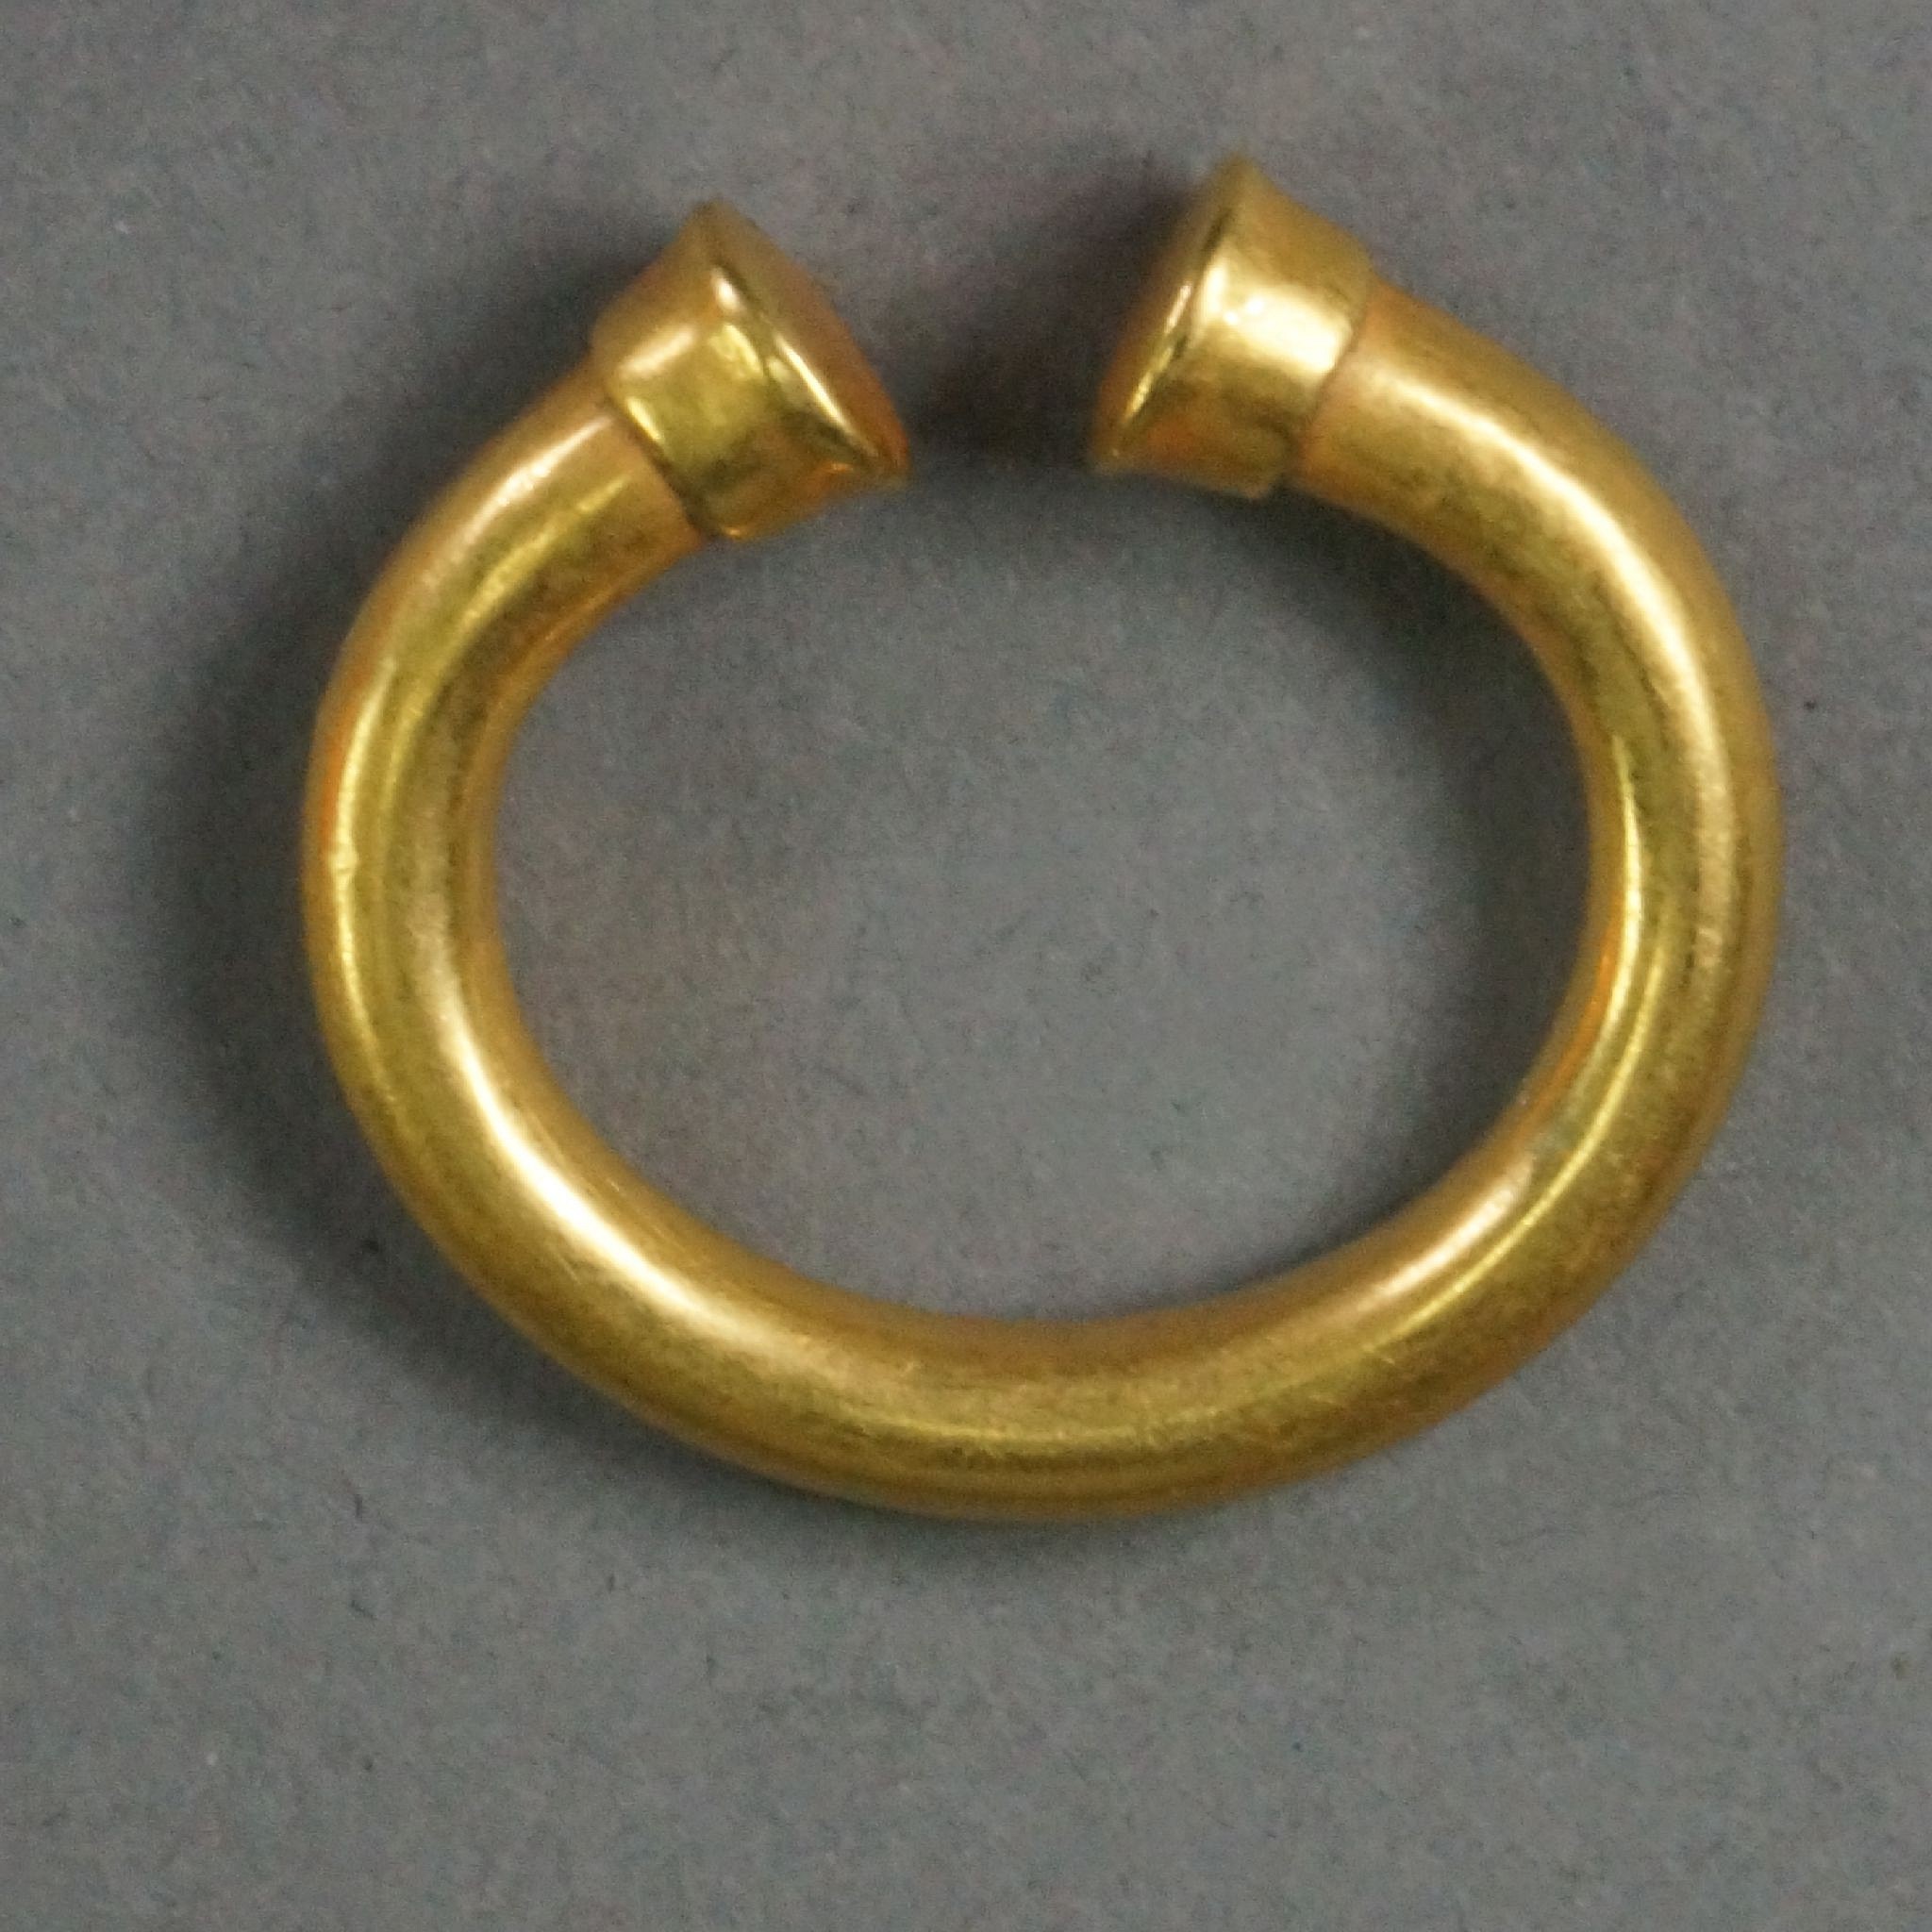 Colombia, Sinu Ring with Capped Ends
This high-karat, solid gold ring is has a lovely burnished finish.  The cylindrical caps are typical of the Sinu, and are individually hammered onto the ends.
Media: Metal
Dimensions: Diameter: 1" 3/16"   Weight: 16.4 grams
$2,500
n7034